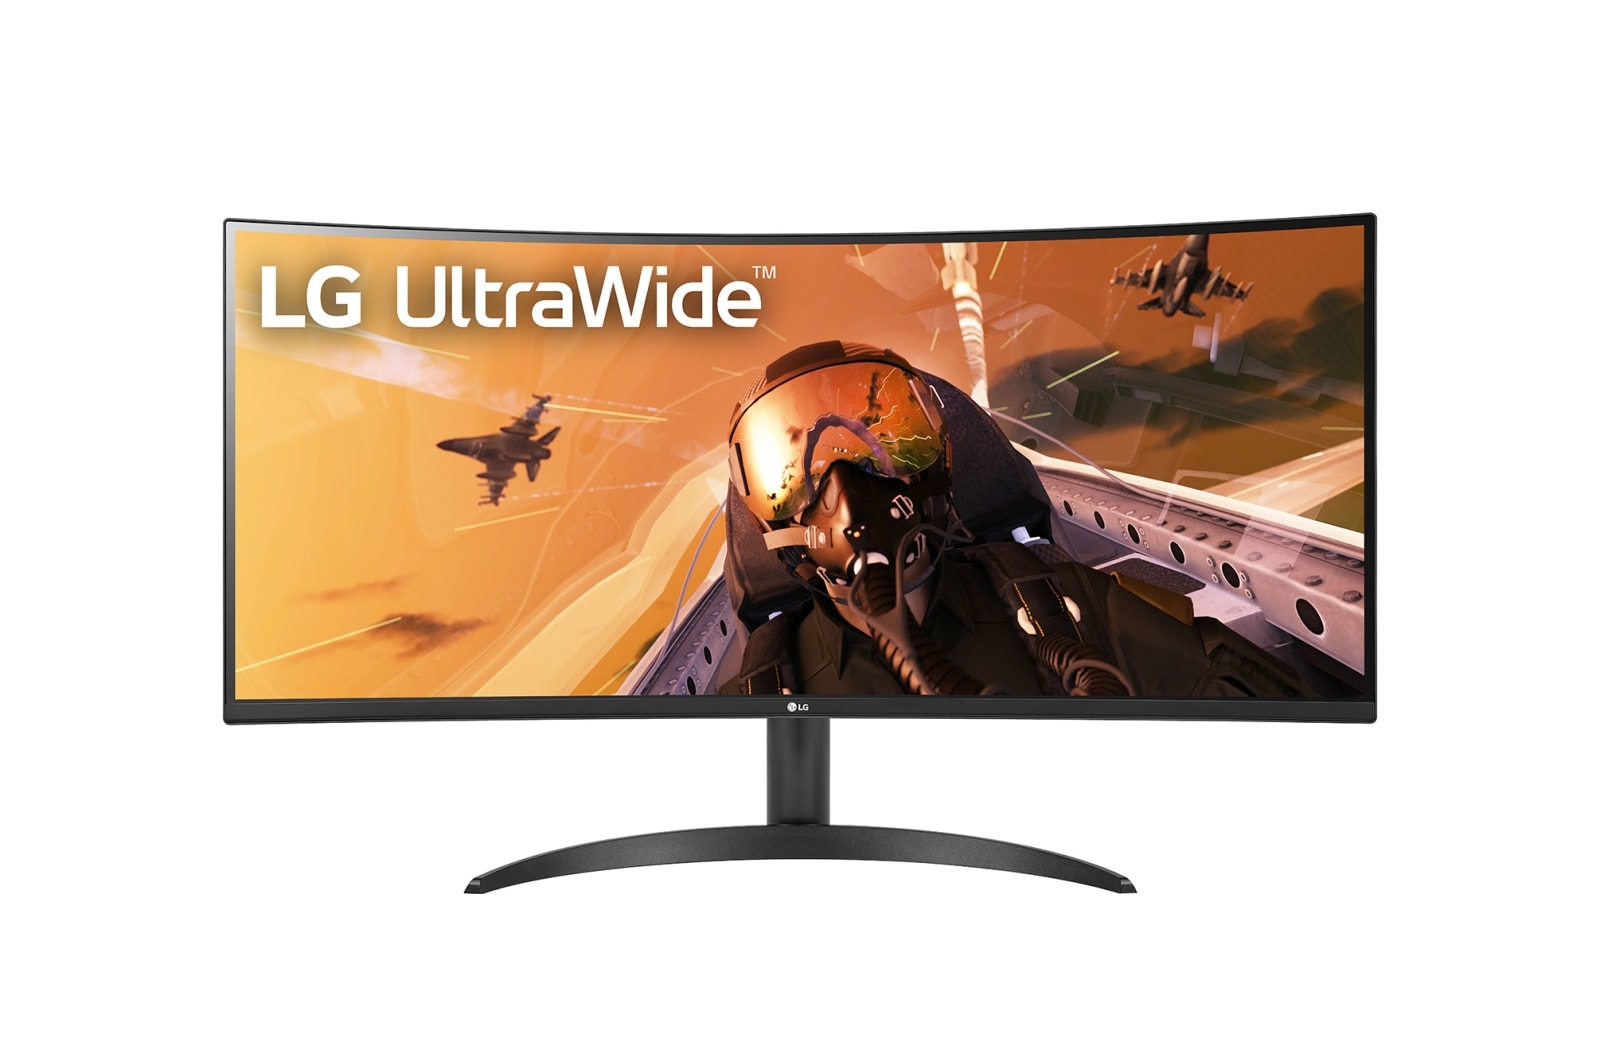 LG 34WP85C-B 34-inch Curved 21:9 UltraWide QHD (3440x1440) IPS Display with  USB Type C (90W Power delivery), DCI-P3 95% Color Gamut with HDR 10 and Ti 